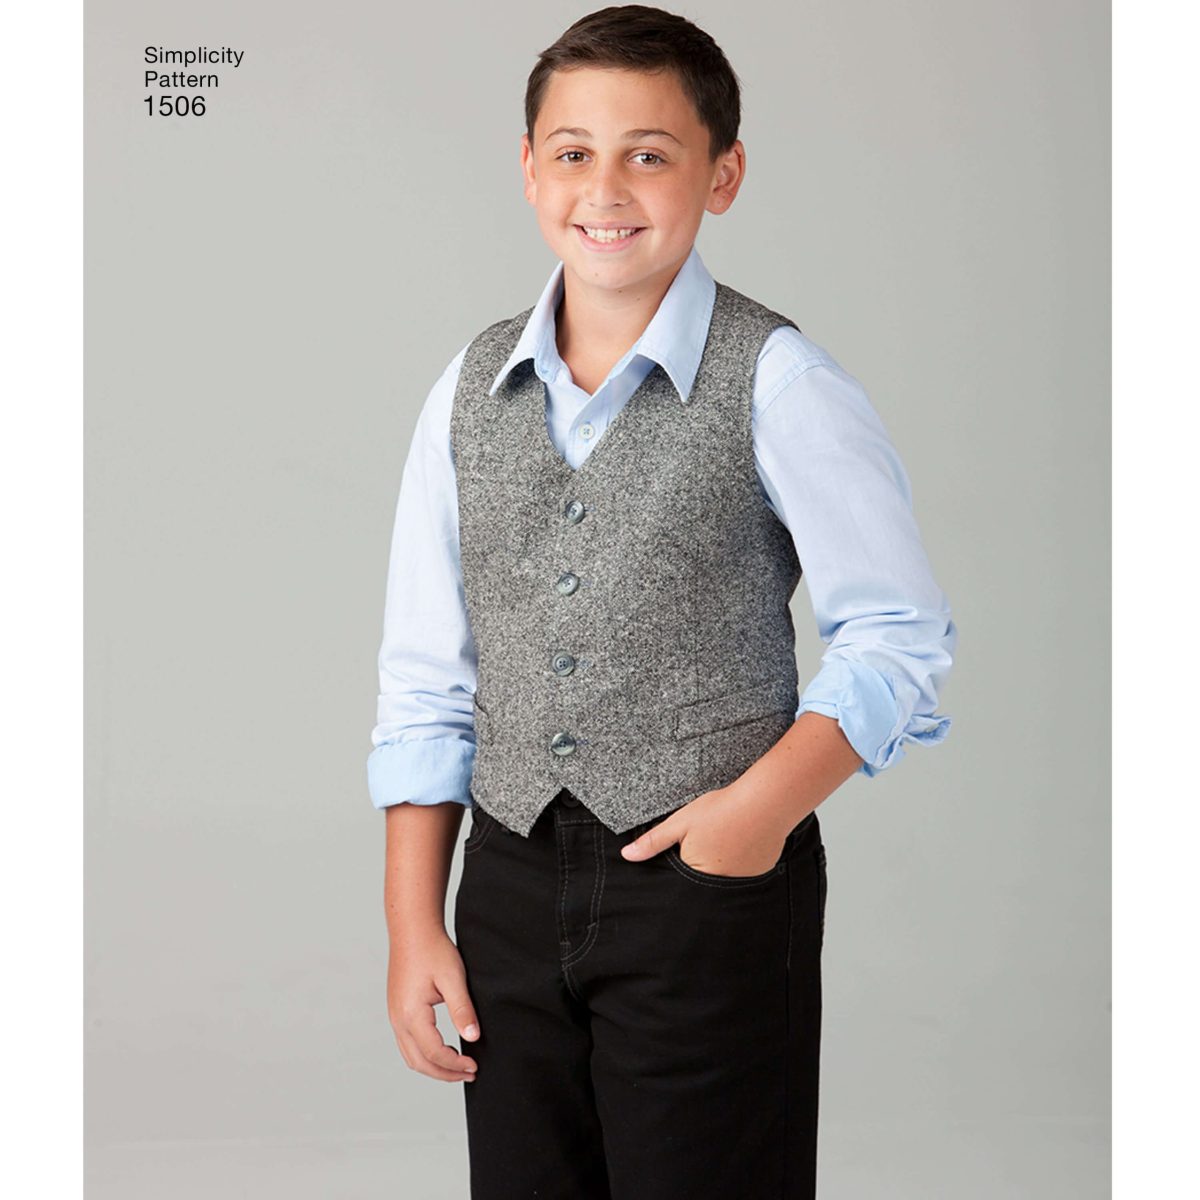 Simplicity Sewing Pattern 1506 Husky Boys' and Big and Tall Men's Vests